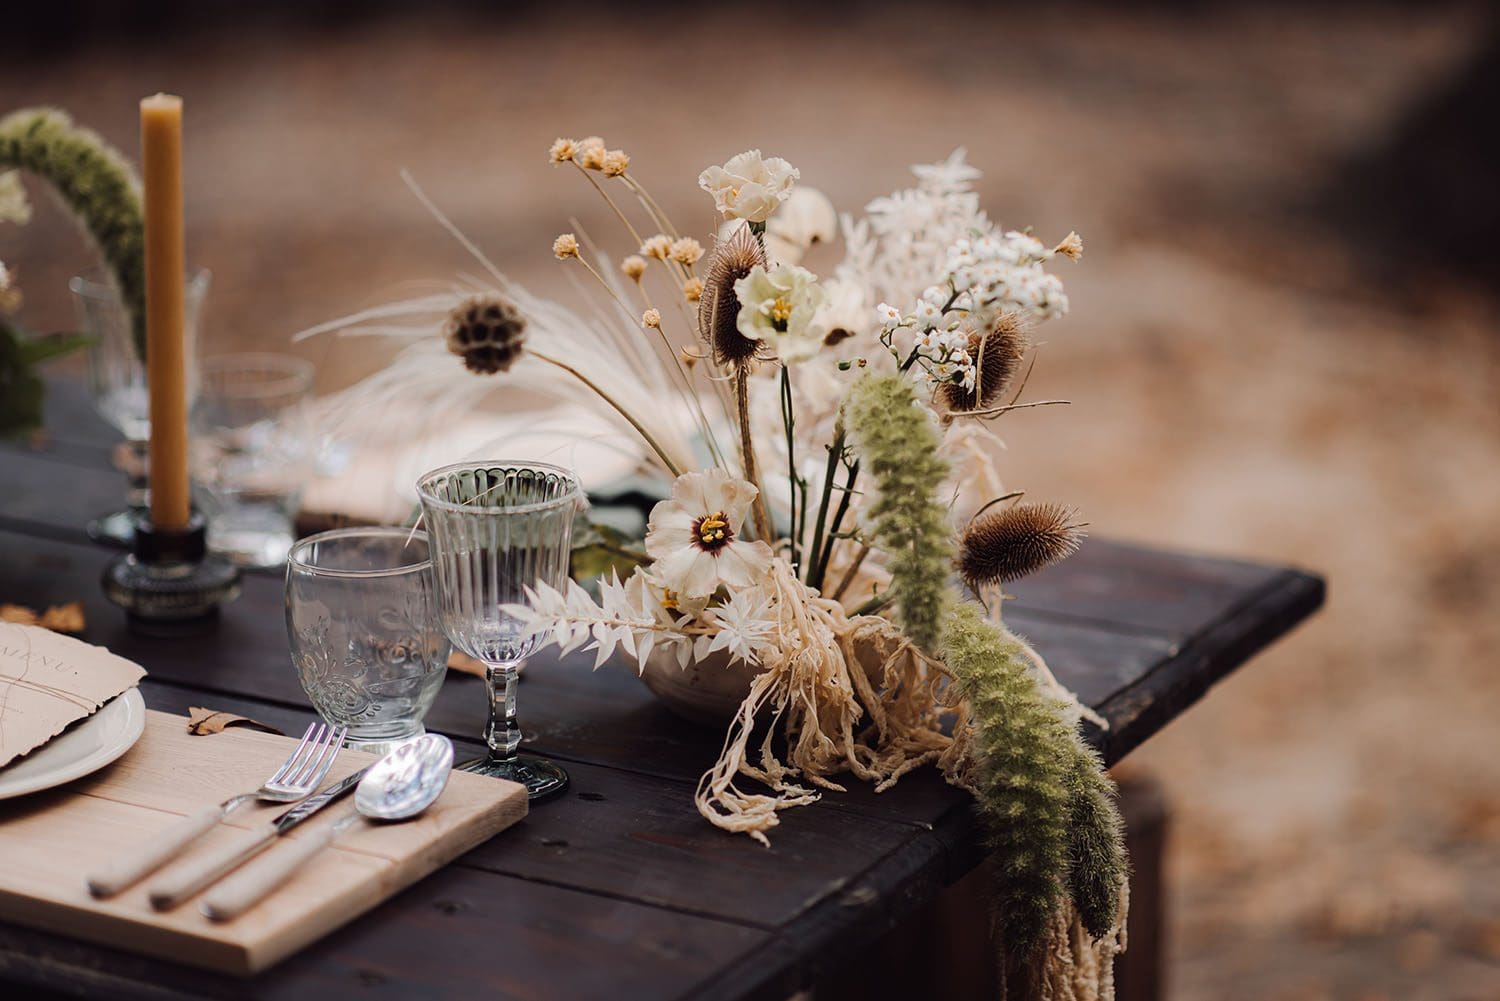 Beautifully designed wedding table in the forest.